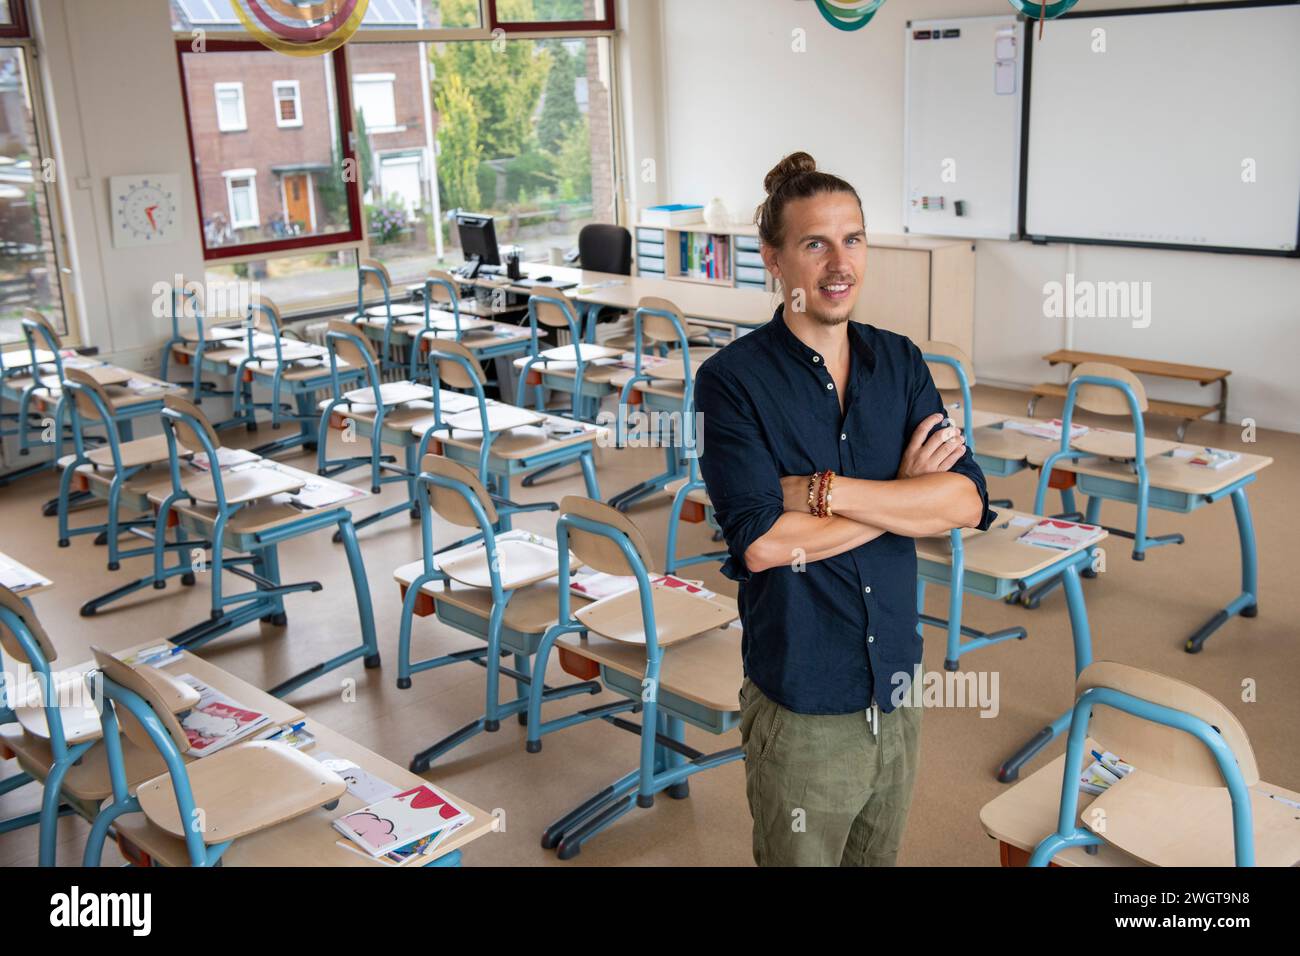 Primary school teacher standing in his empty classroom waiting for the children to arrive Stock Photo